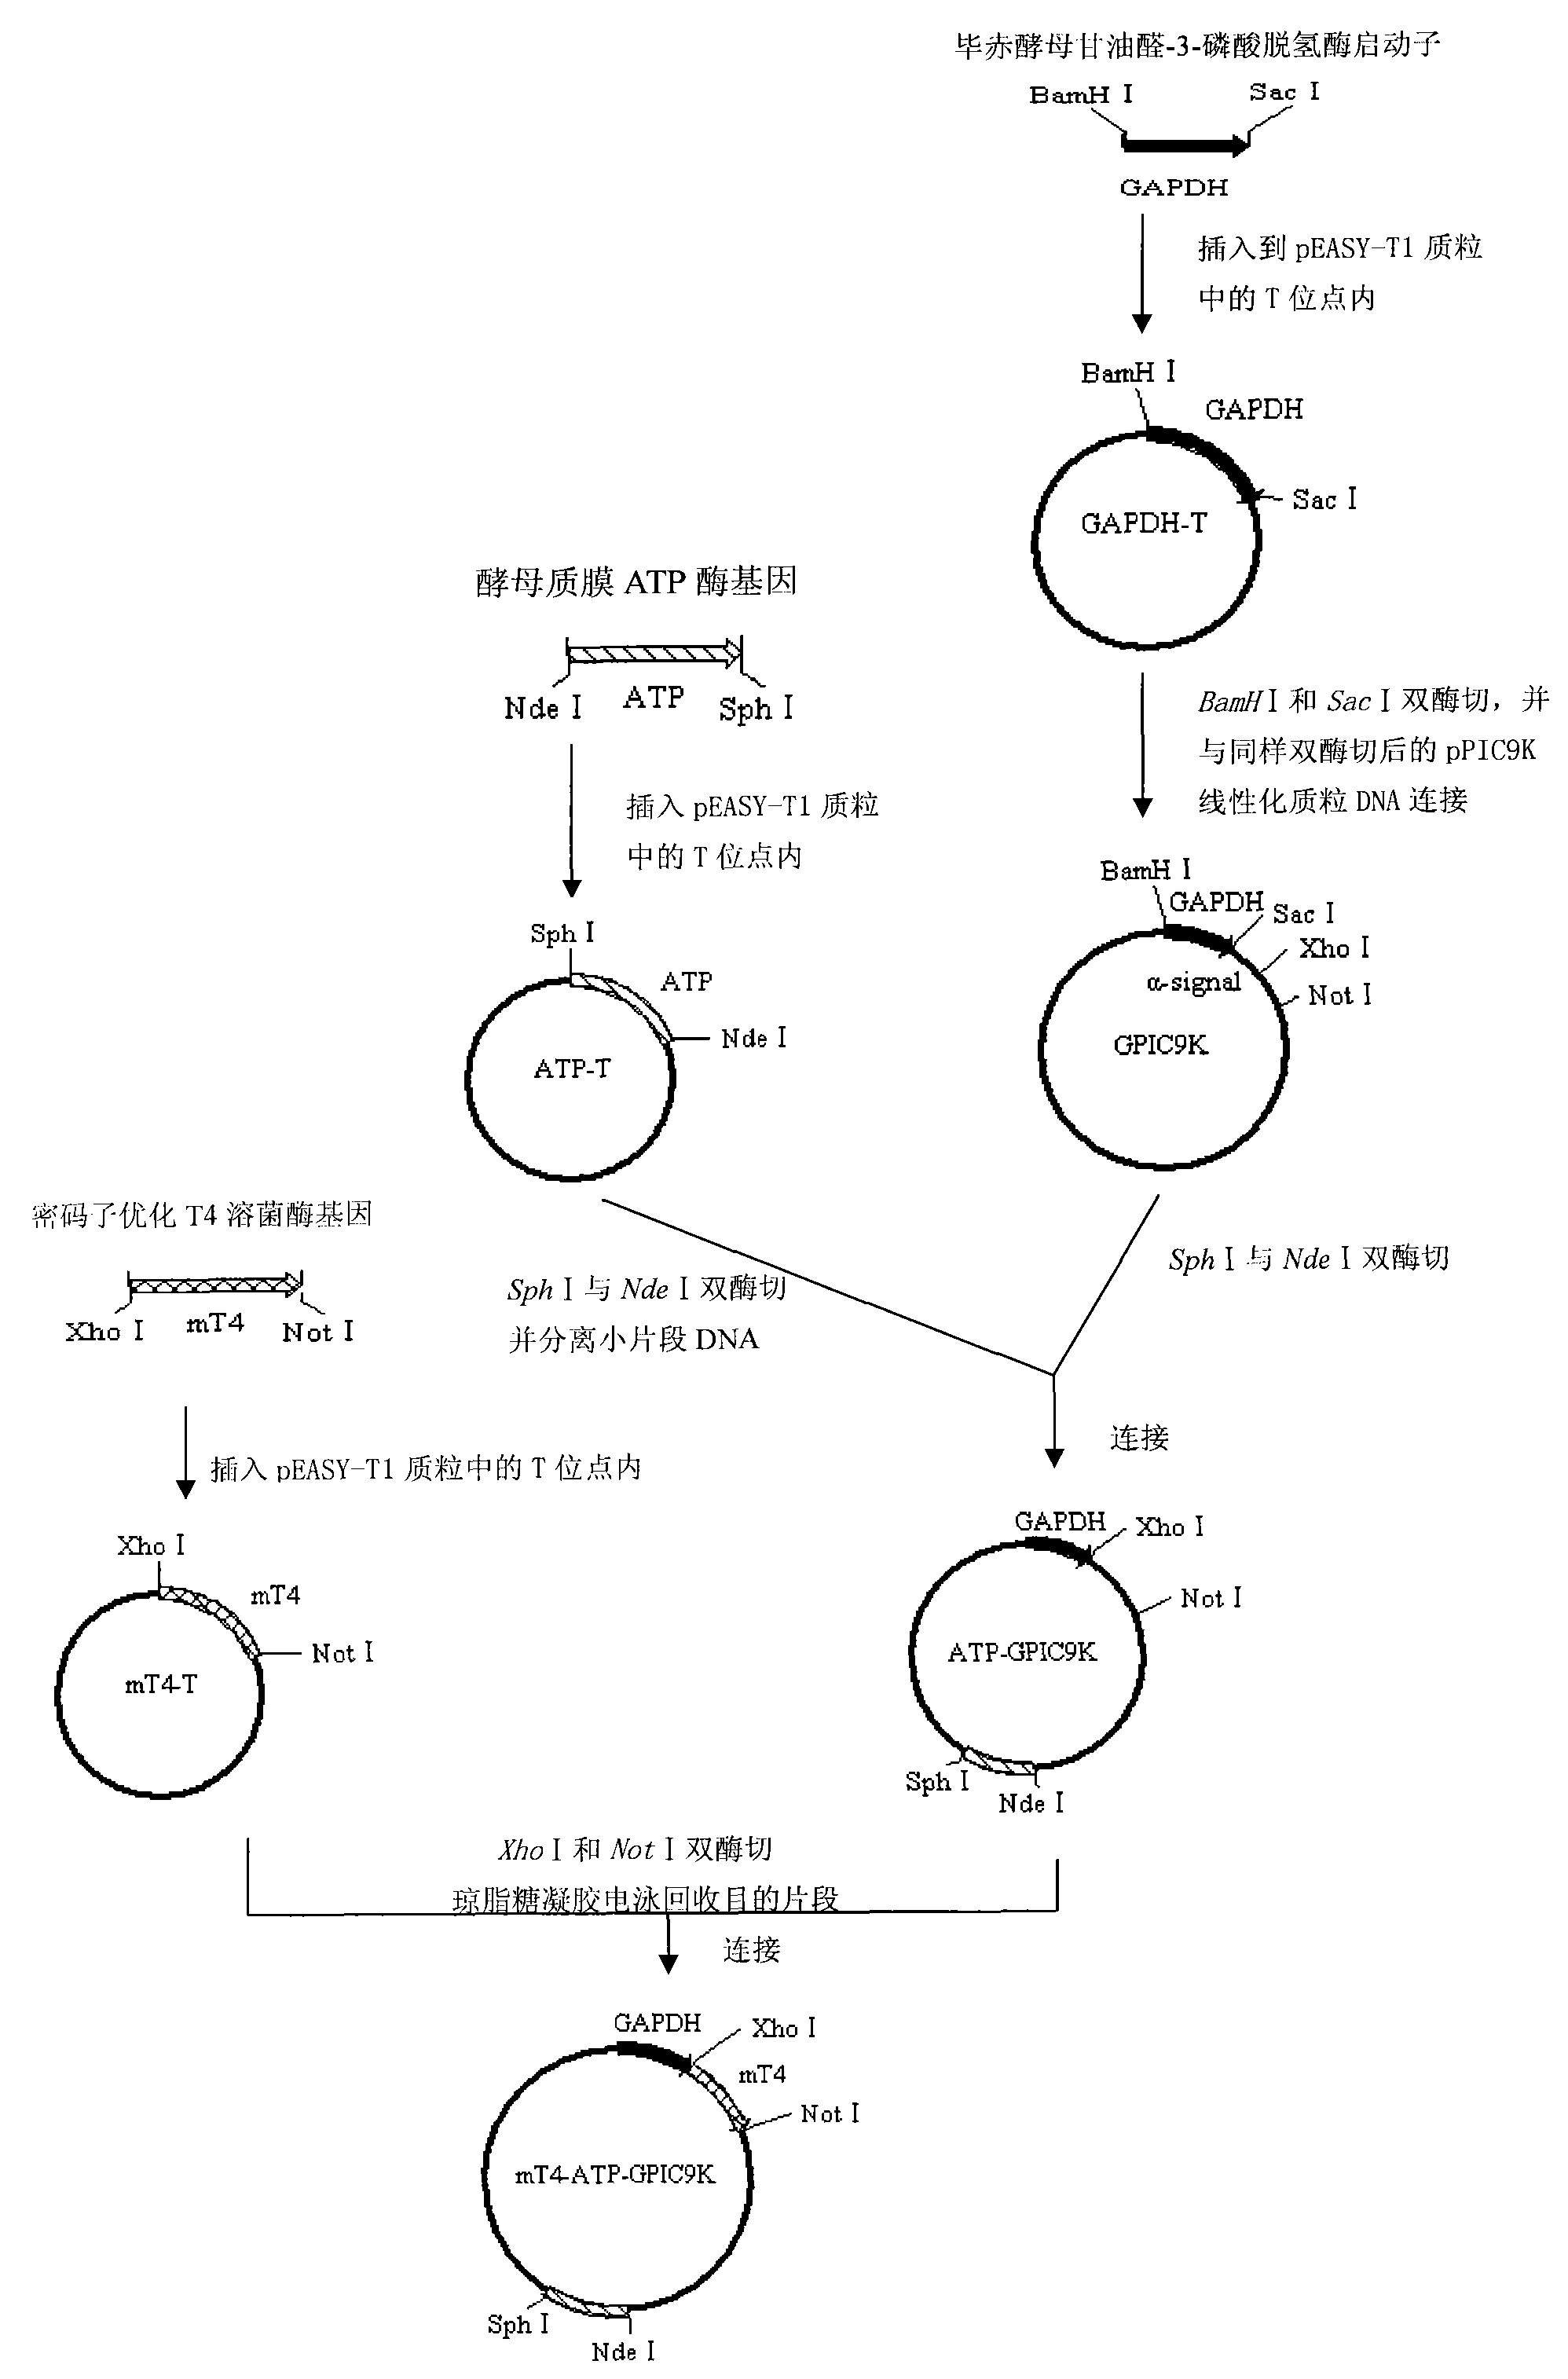 Method for efficiently expressing and producing T4 lysozyme through recombinant hansenula polymorpha in constitutive mode